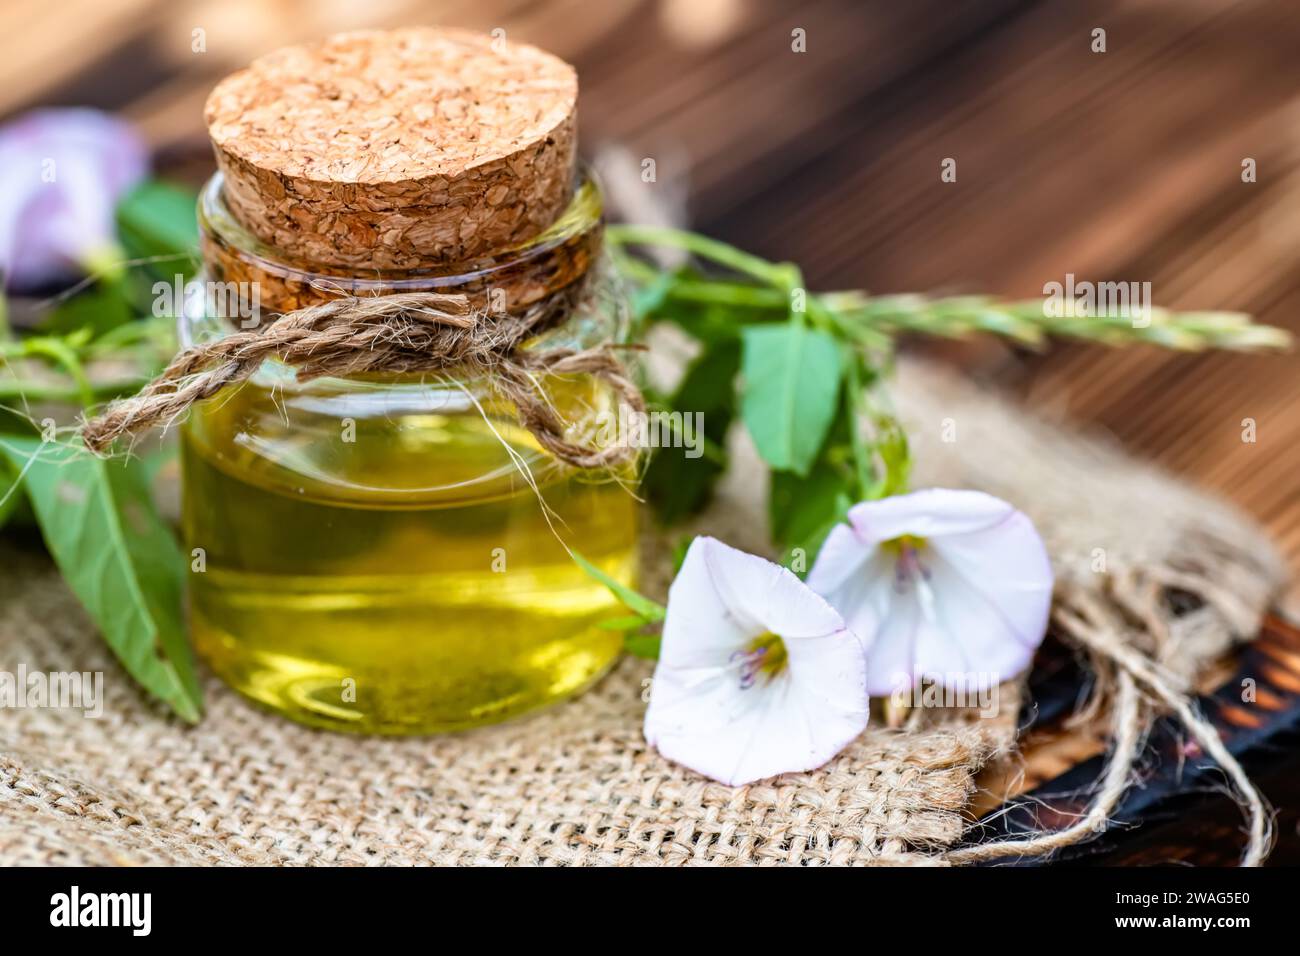 Convolvulus arvensis, or field bindweed making an elixir or tincture with essential oil from flowers. Top view. Fresh plants on a wooden cutting board Stock Photo